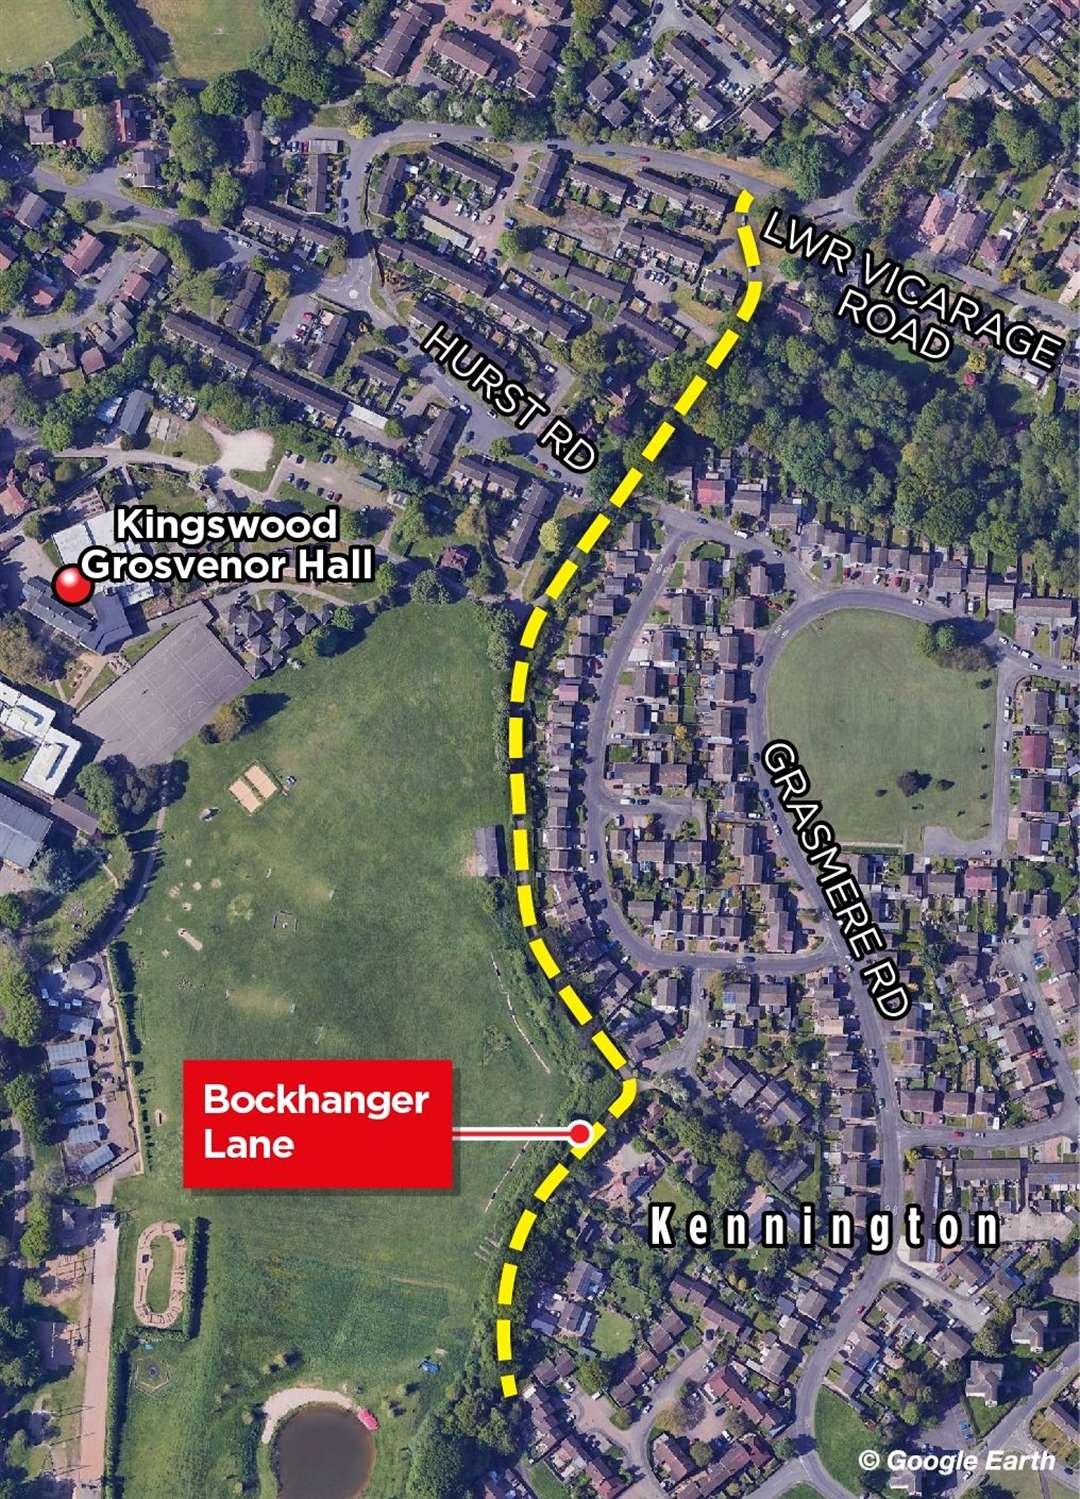 This map shows the part of Bockhanger Lane which cars can access